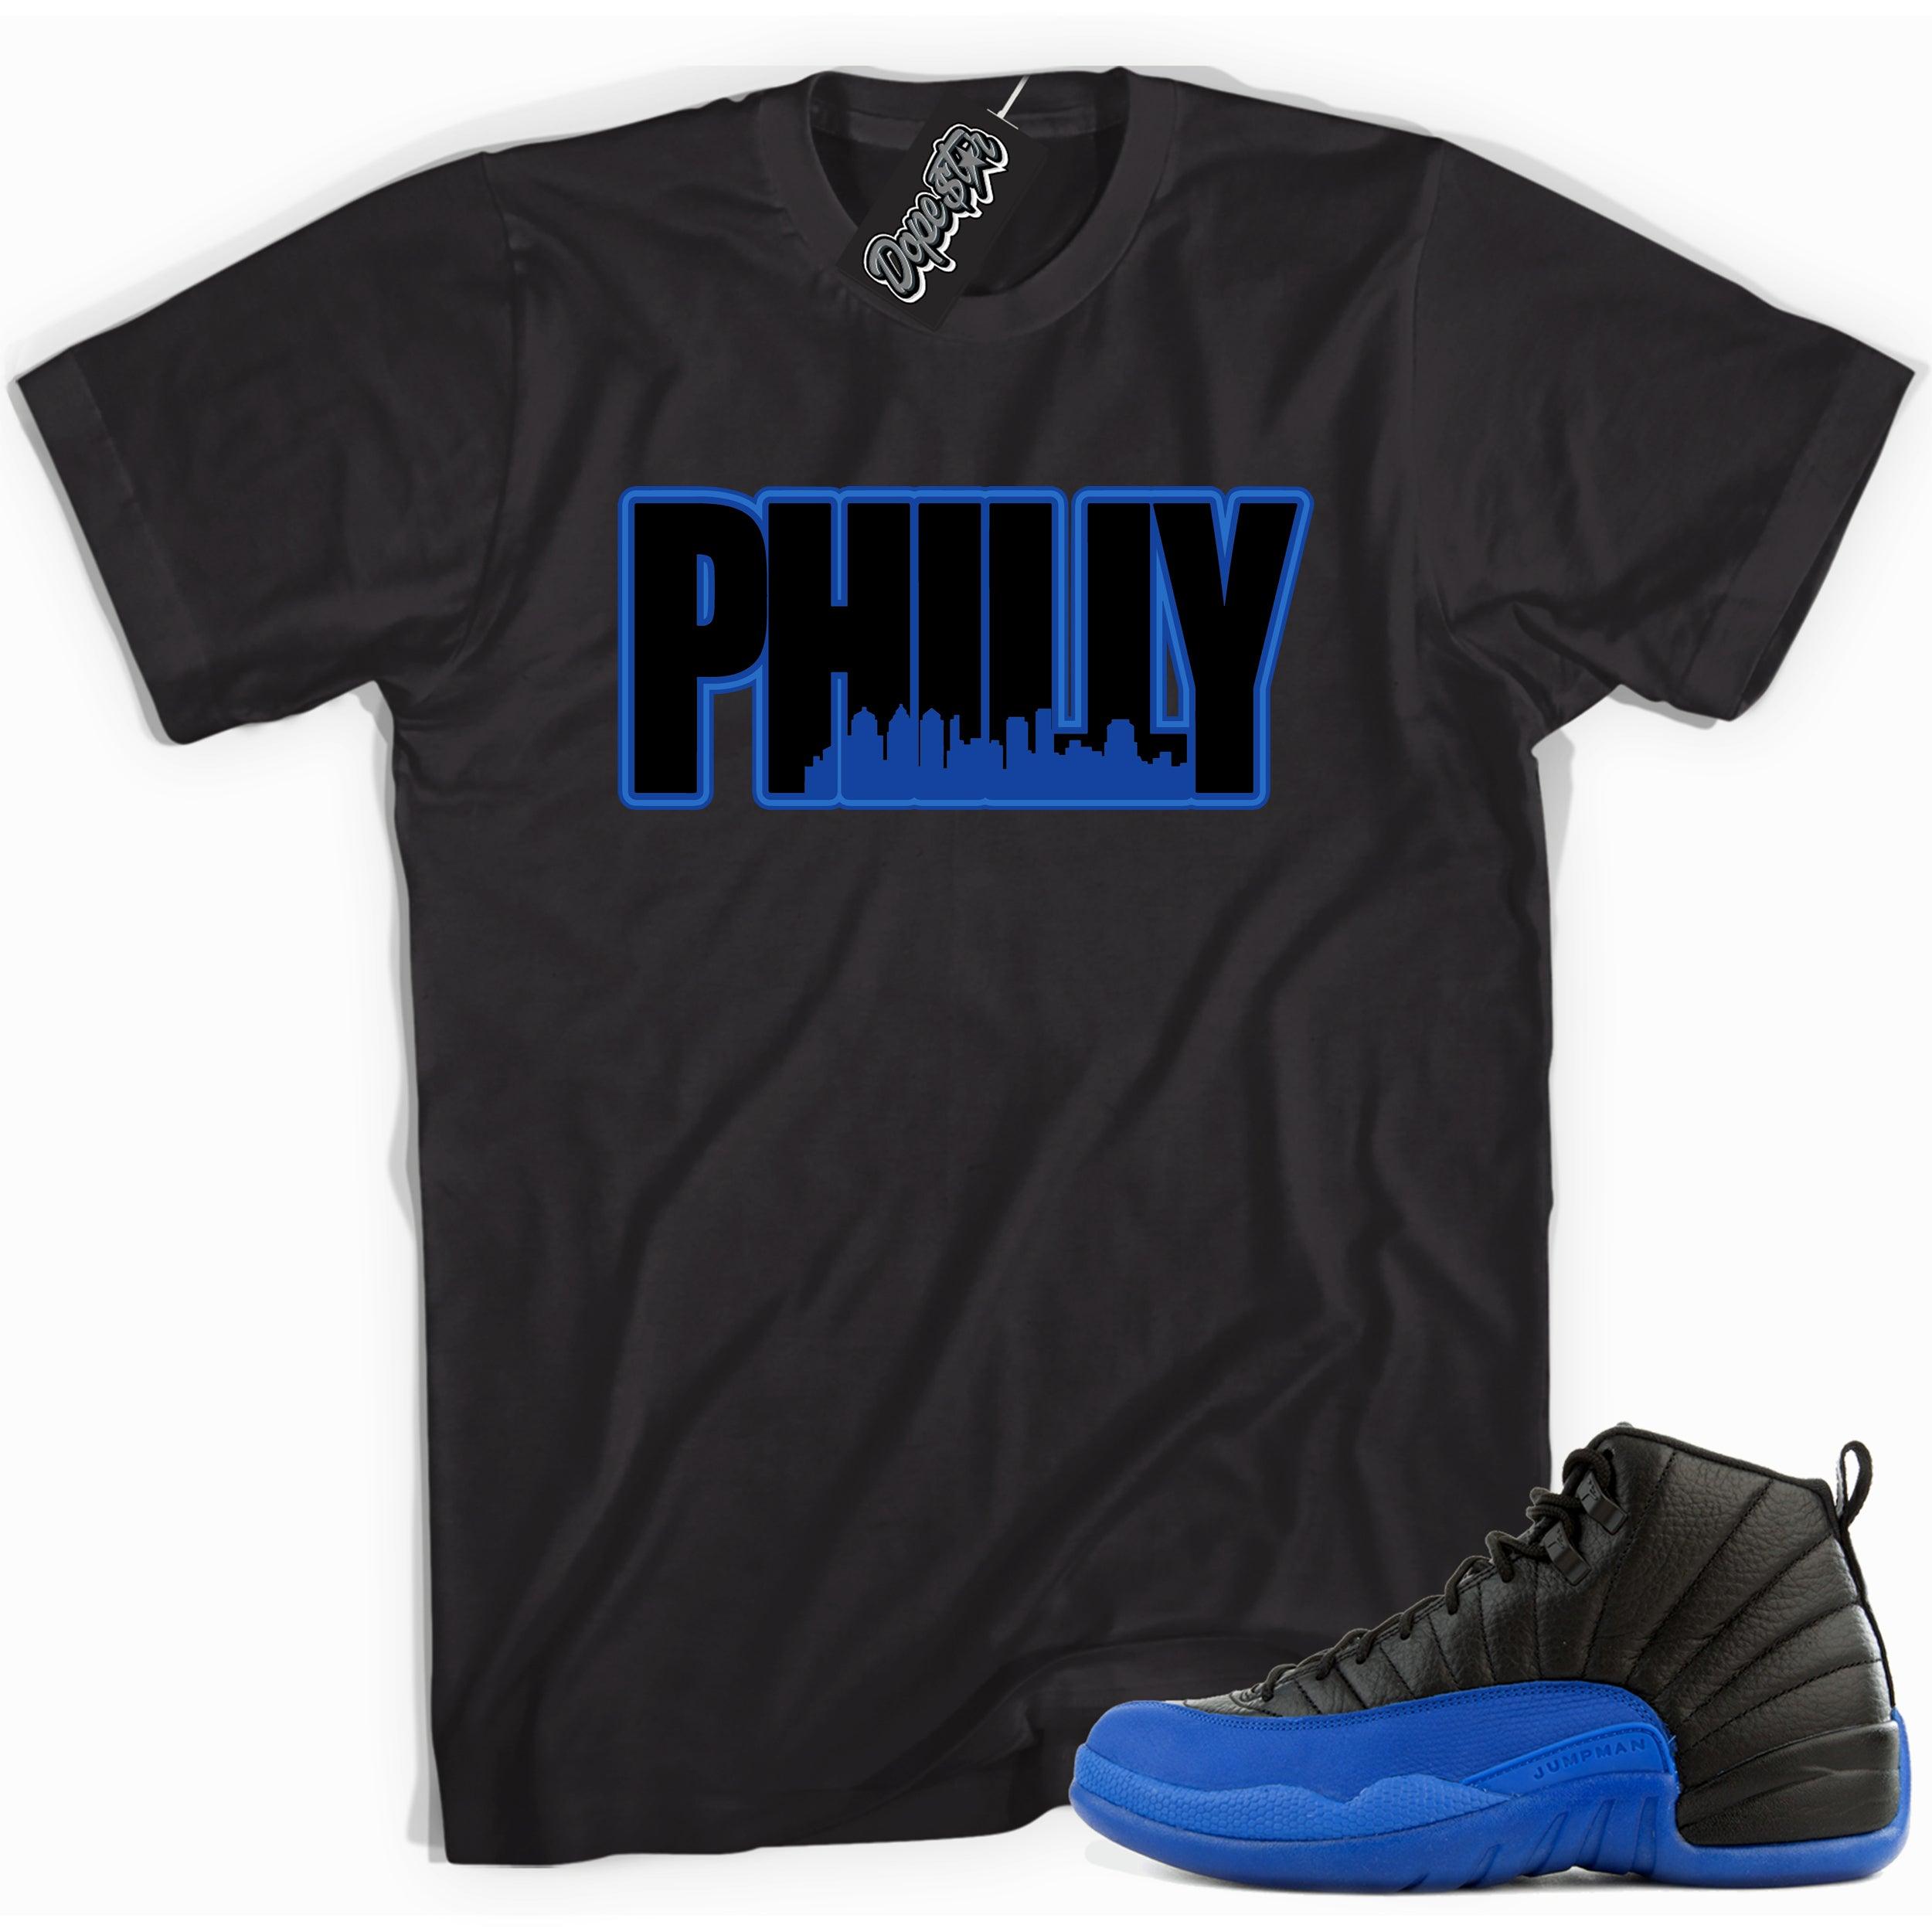 Cool black graphic tee with 'philly' print, that perfectly matches  Air Jordan 12 Retro Black Game Royal sneakers.